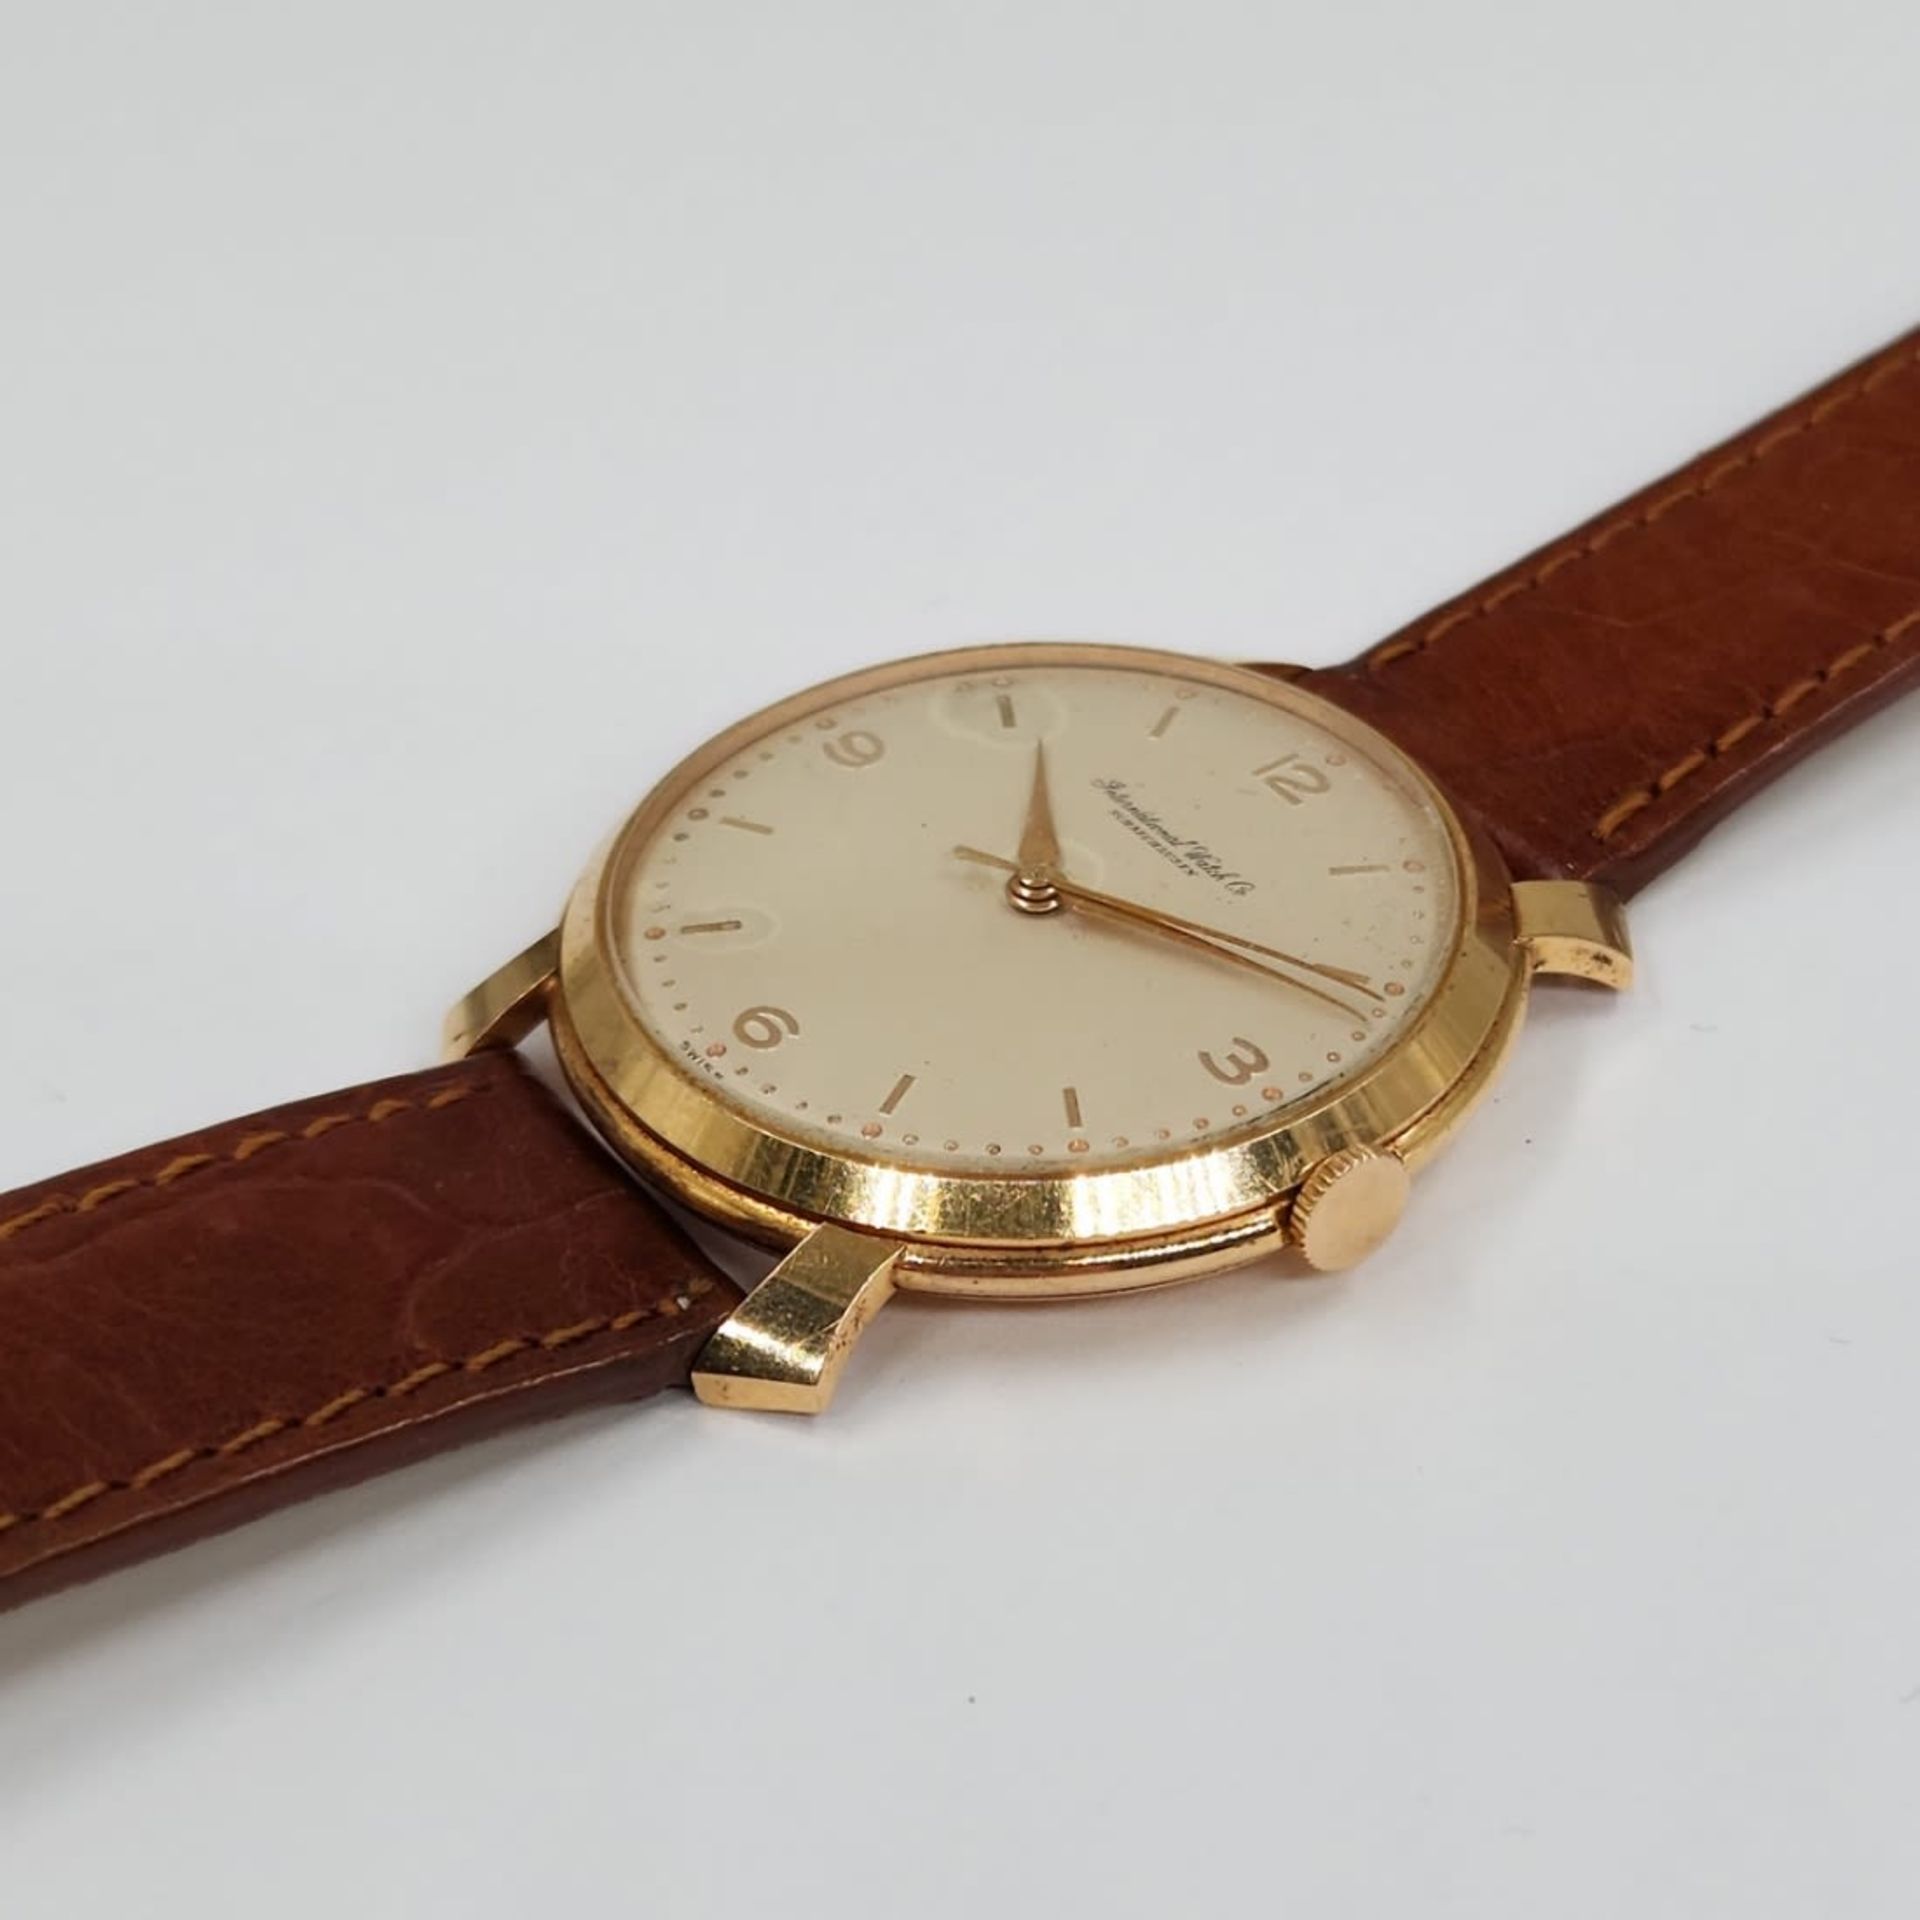 Wristwatch for men made by: 'Schaffhausen', 14k yellow gold, brown leather strap, working - Image 2 of 4